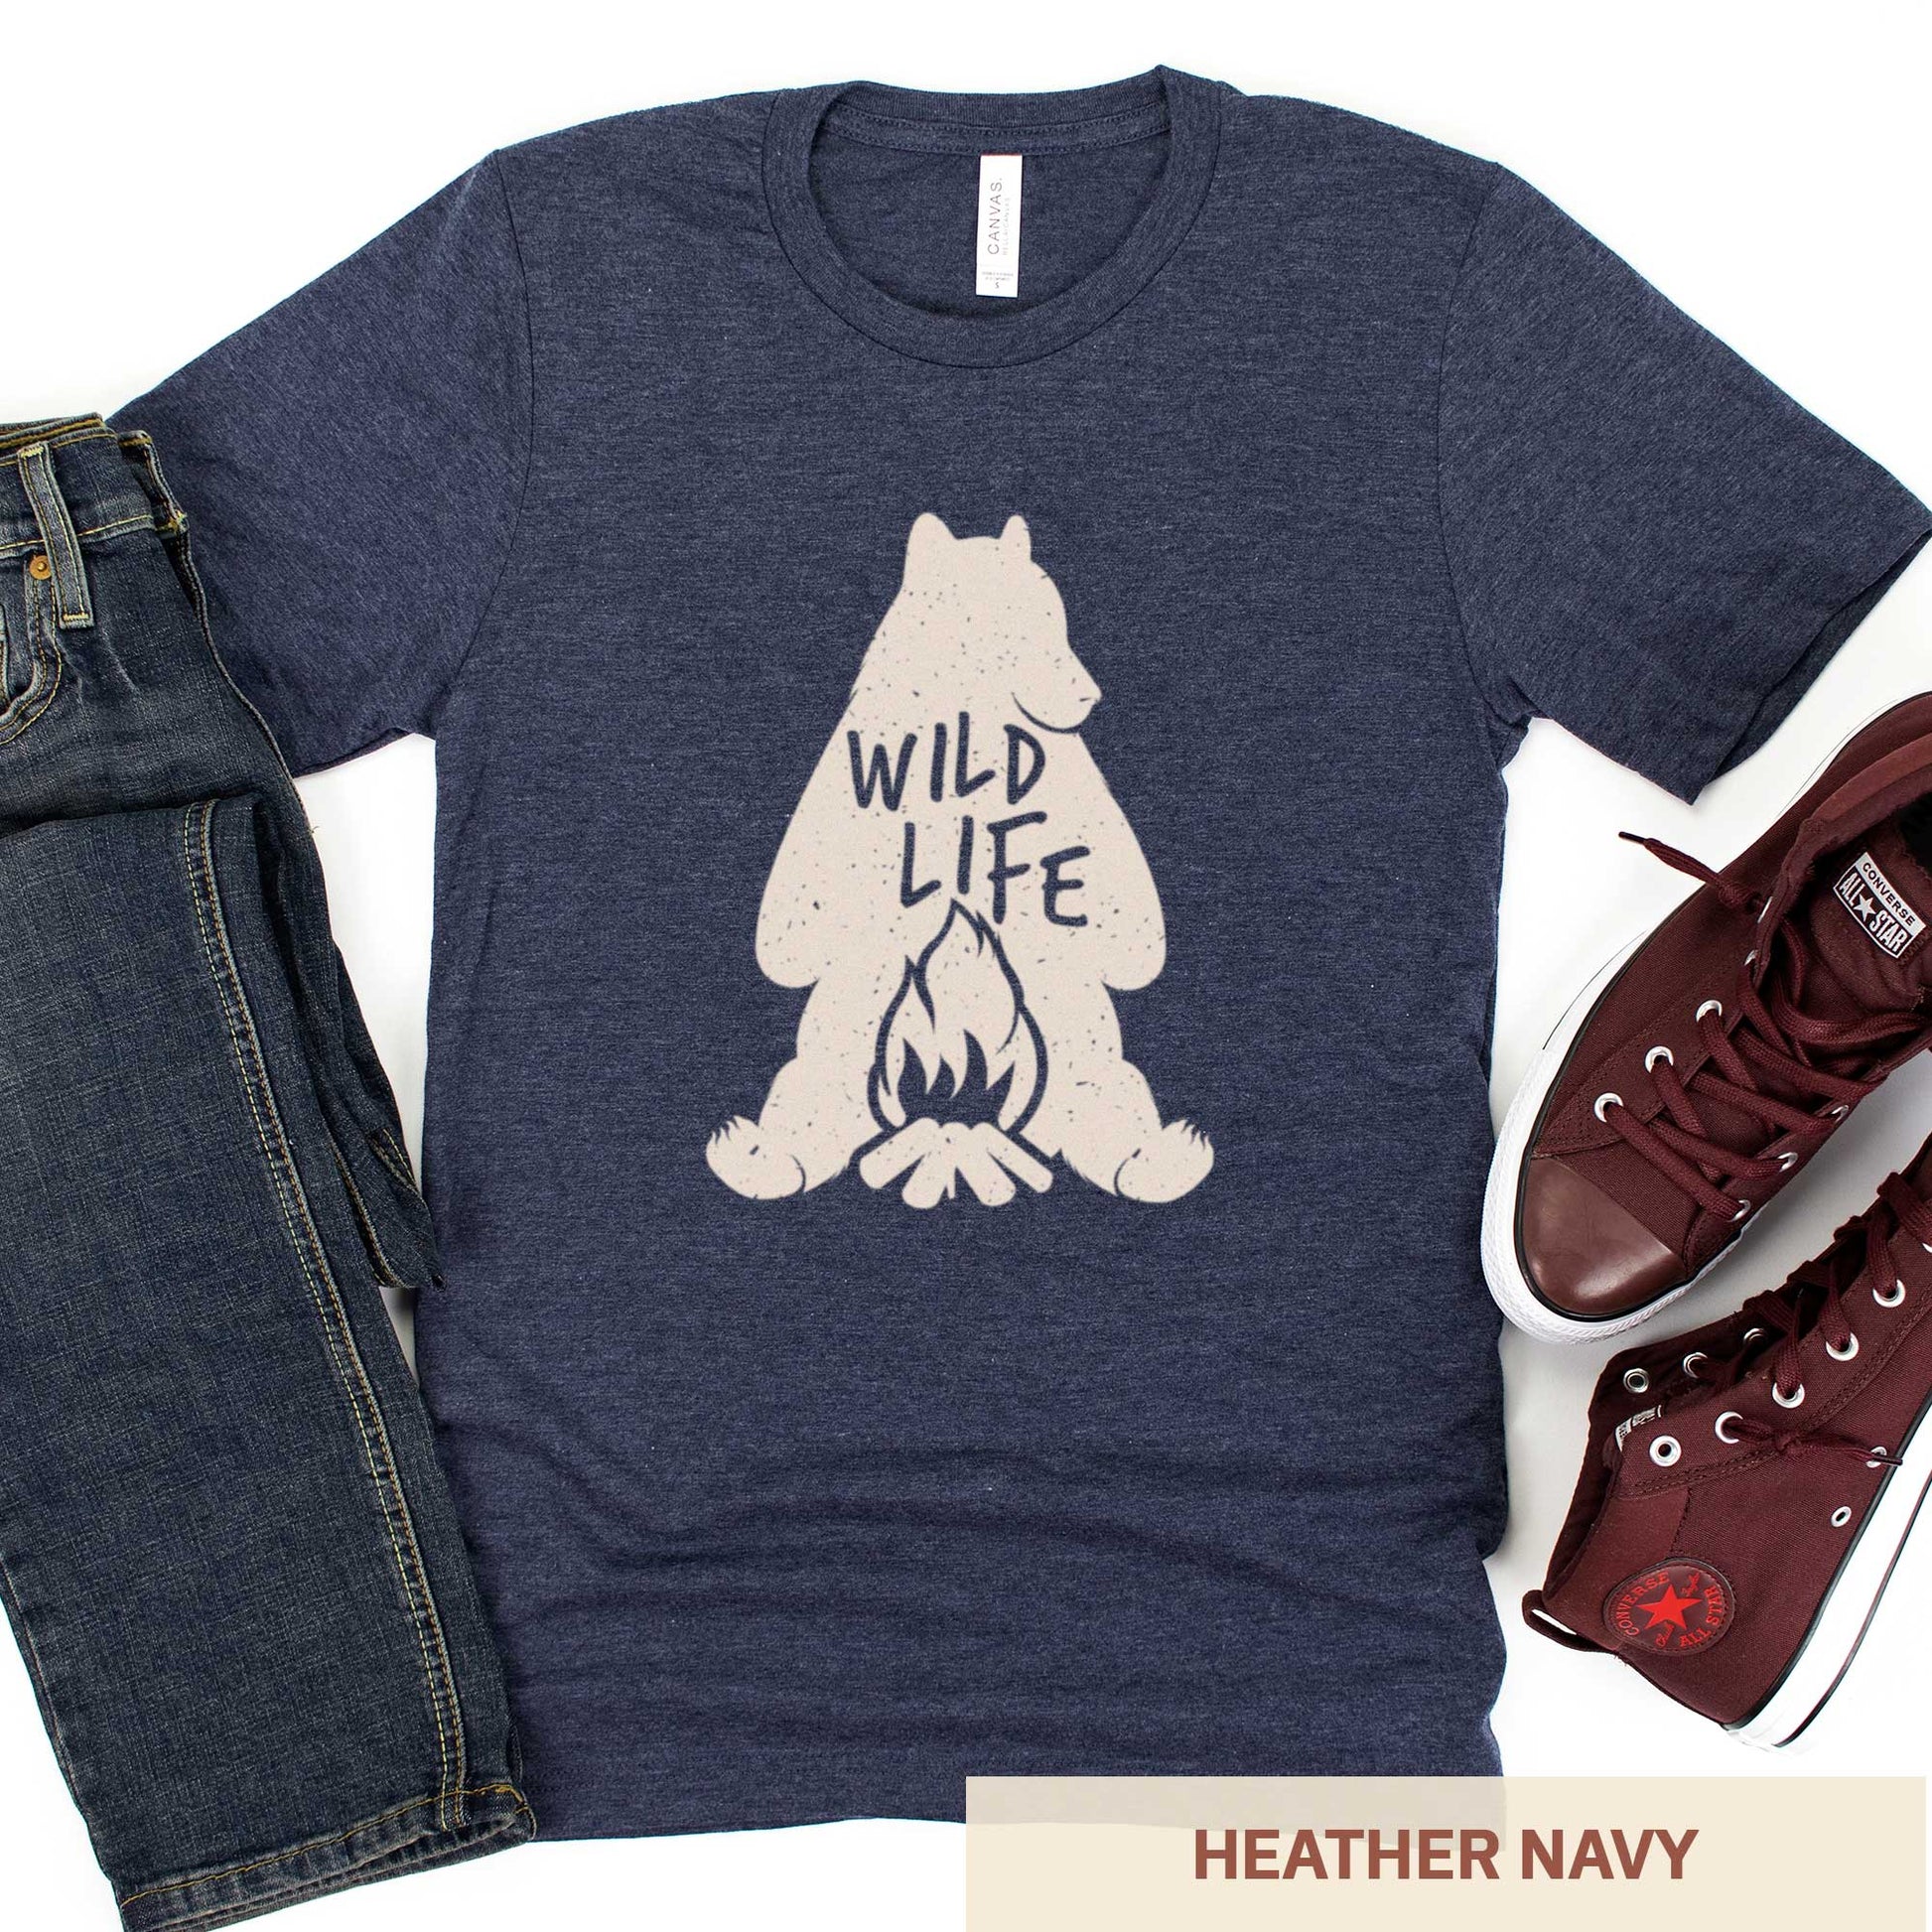 An heather navy Bella Canvas t-shirt featuring a silhouette of a grizzly bear sitting in front of a campfire with the words wild life.